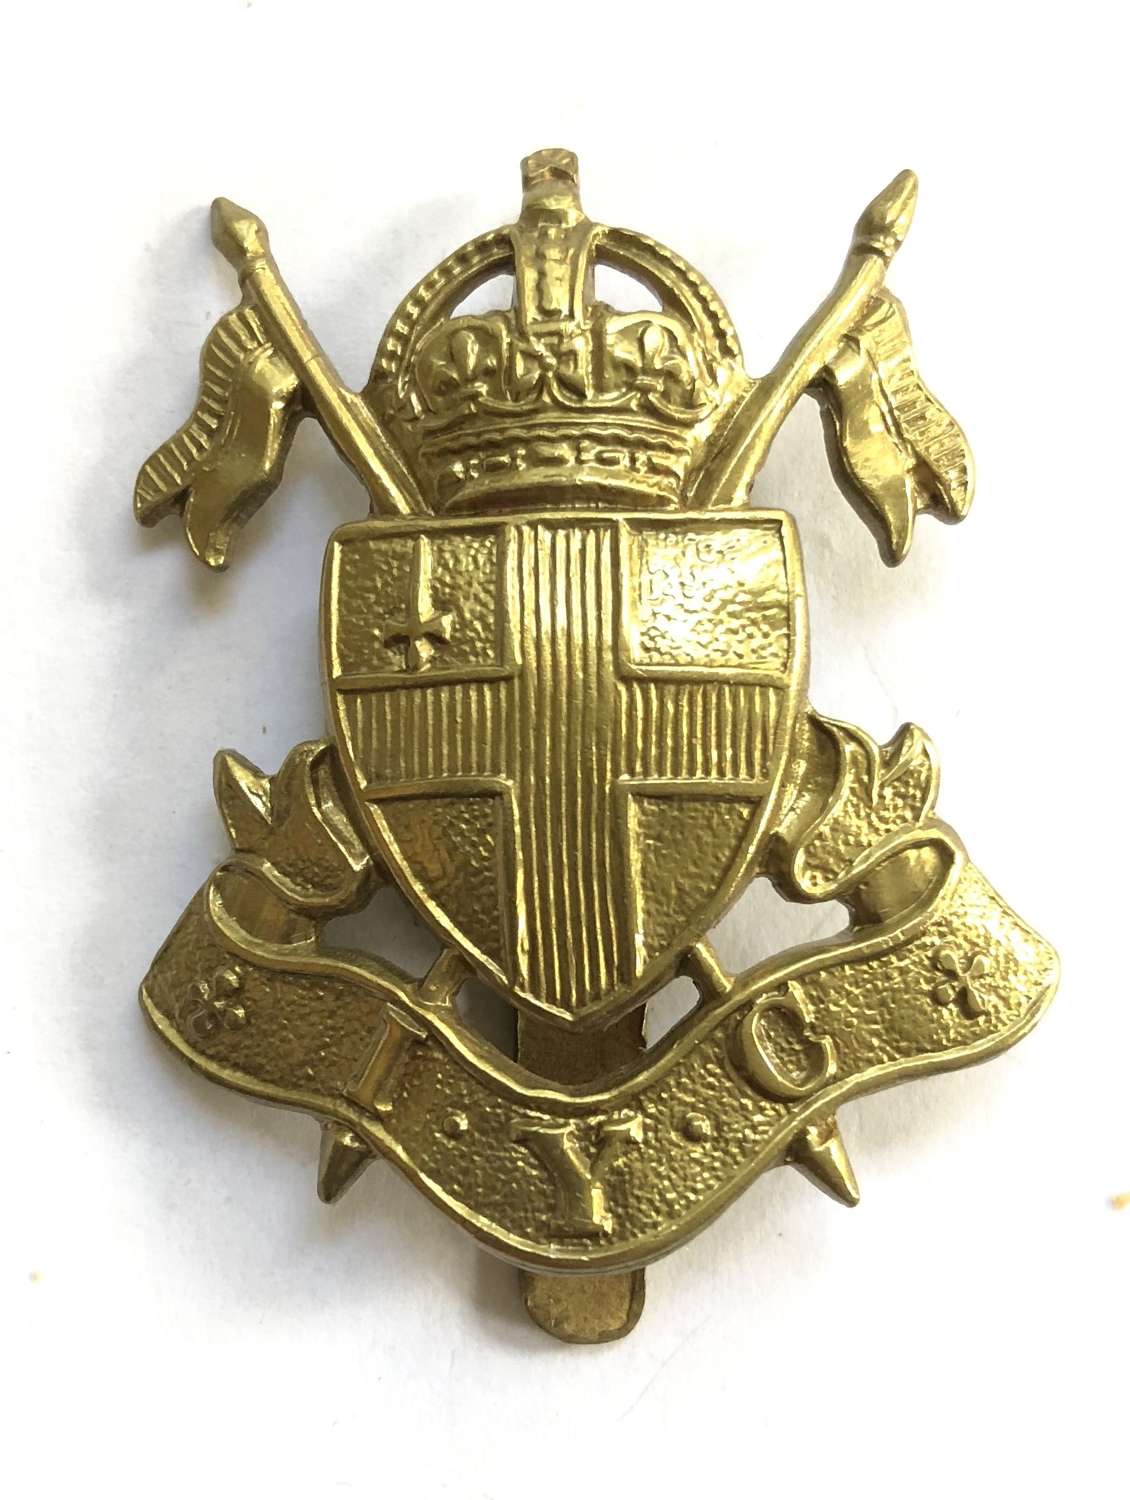 Imperial Yeomanry Cadets scarce brass cap badge